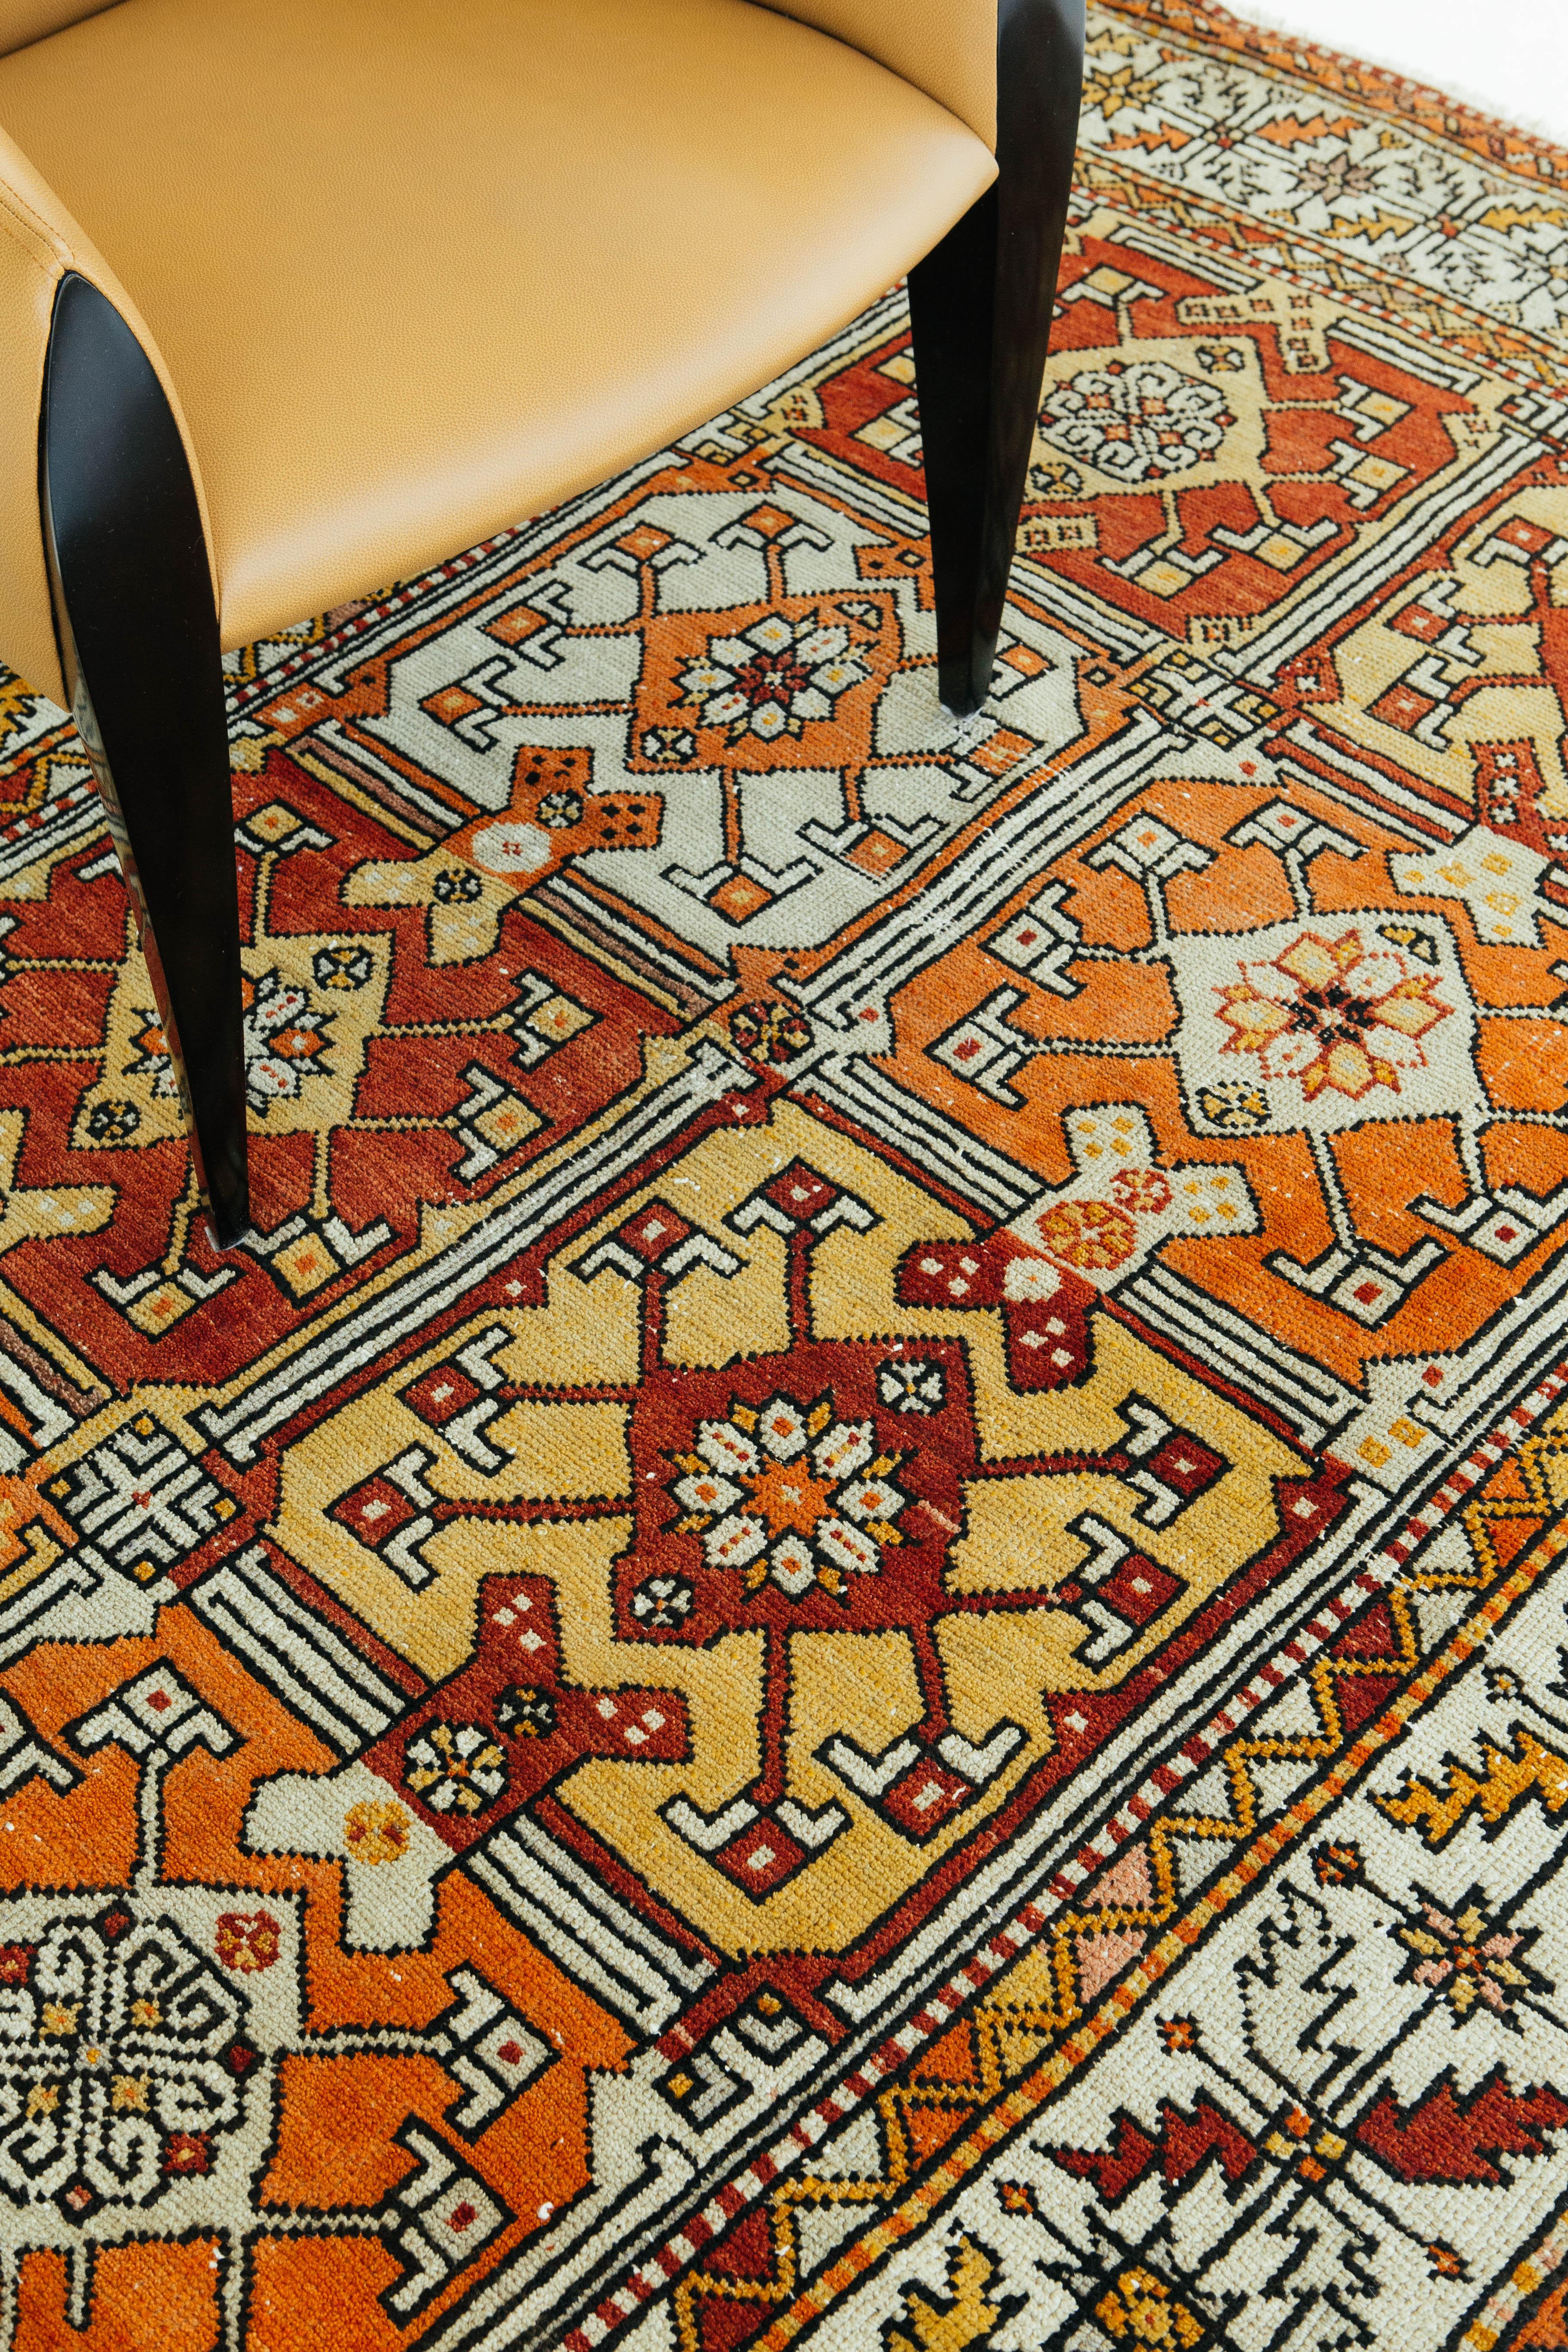 A vibrant and unique vintage Turkish Anatolian rug. Tribal designs are coupled into squares and are also surrounded by lively Anatolian borders. Vintage Turkish Anatolian rugs weave together dyes and colors, motifs, textures and techniques that are